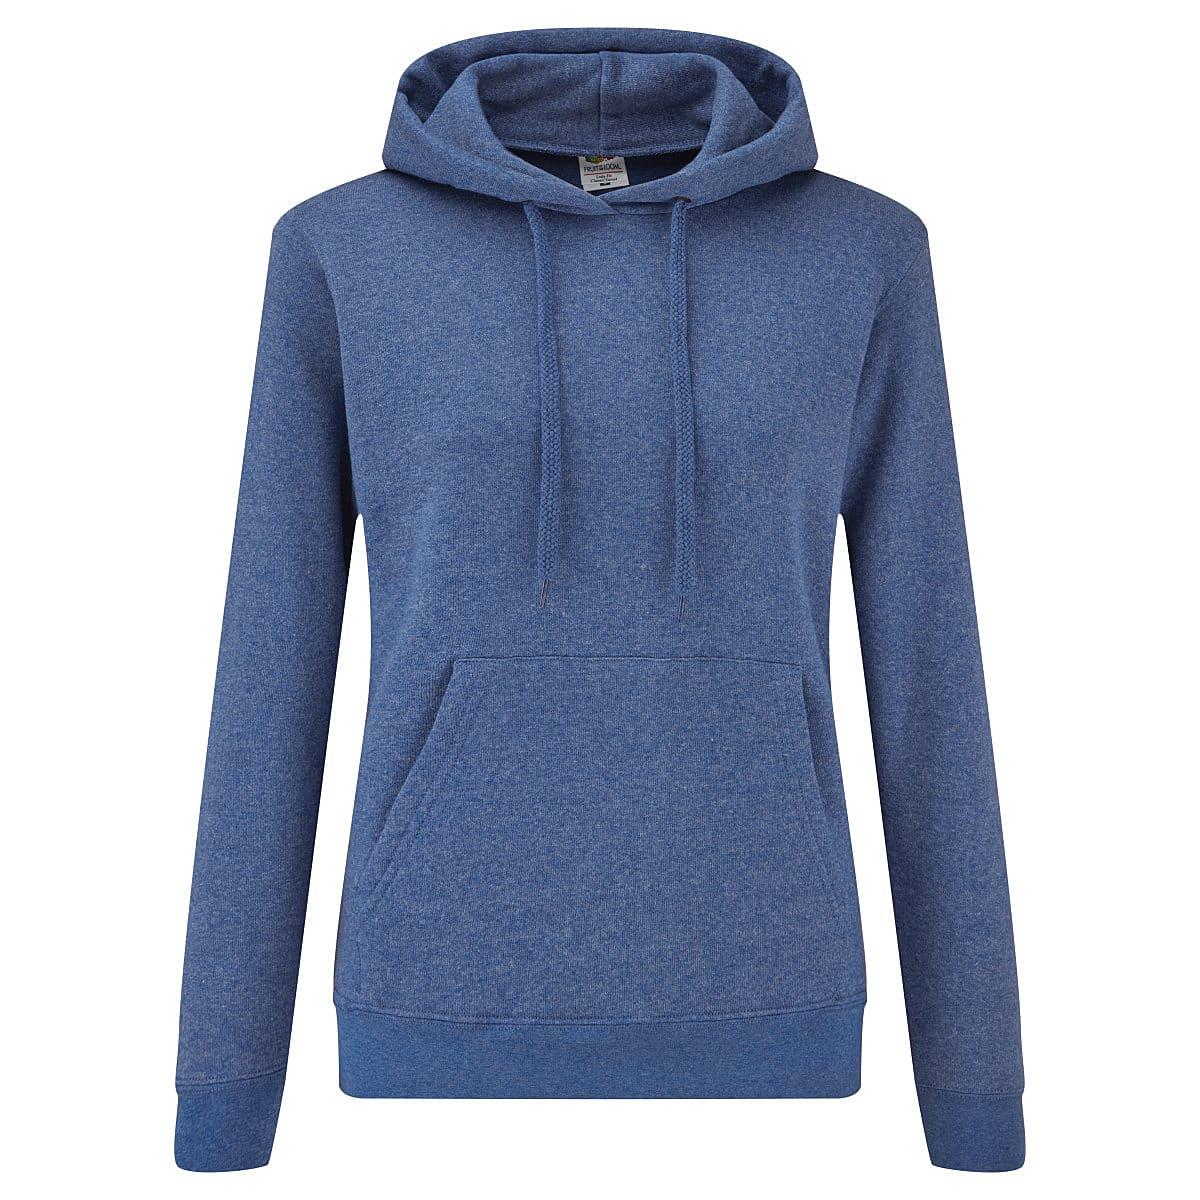 Fruit Of The Loom Lady-Fit Classic Hoodie in Retro Heather Royal (Product Code: 62038)